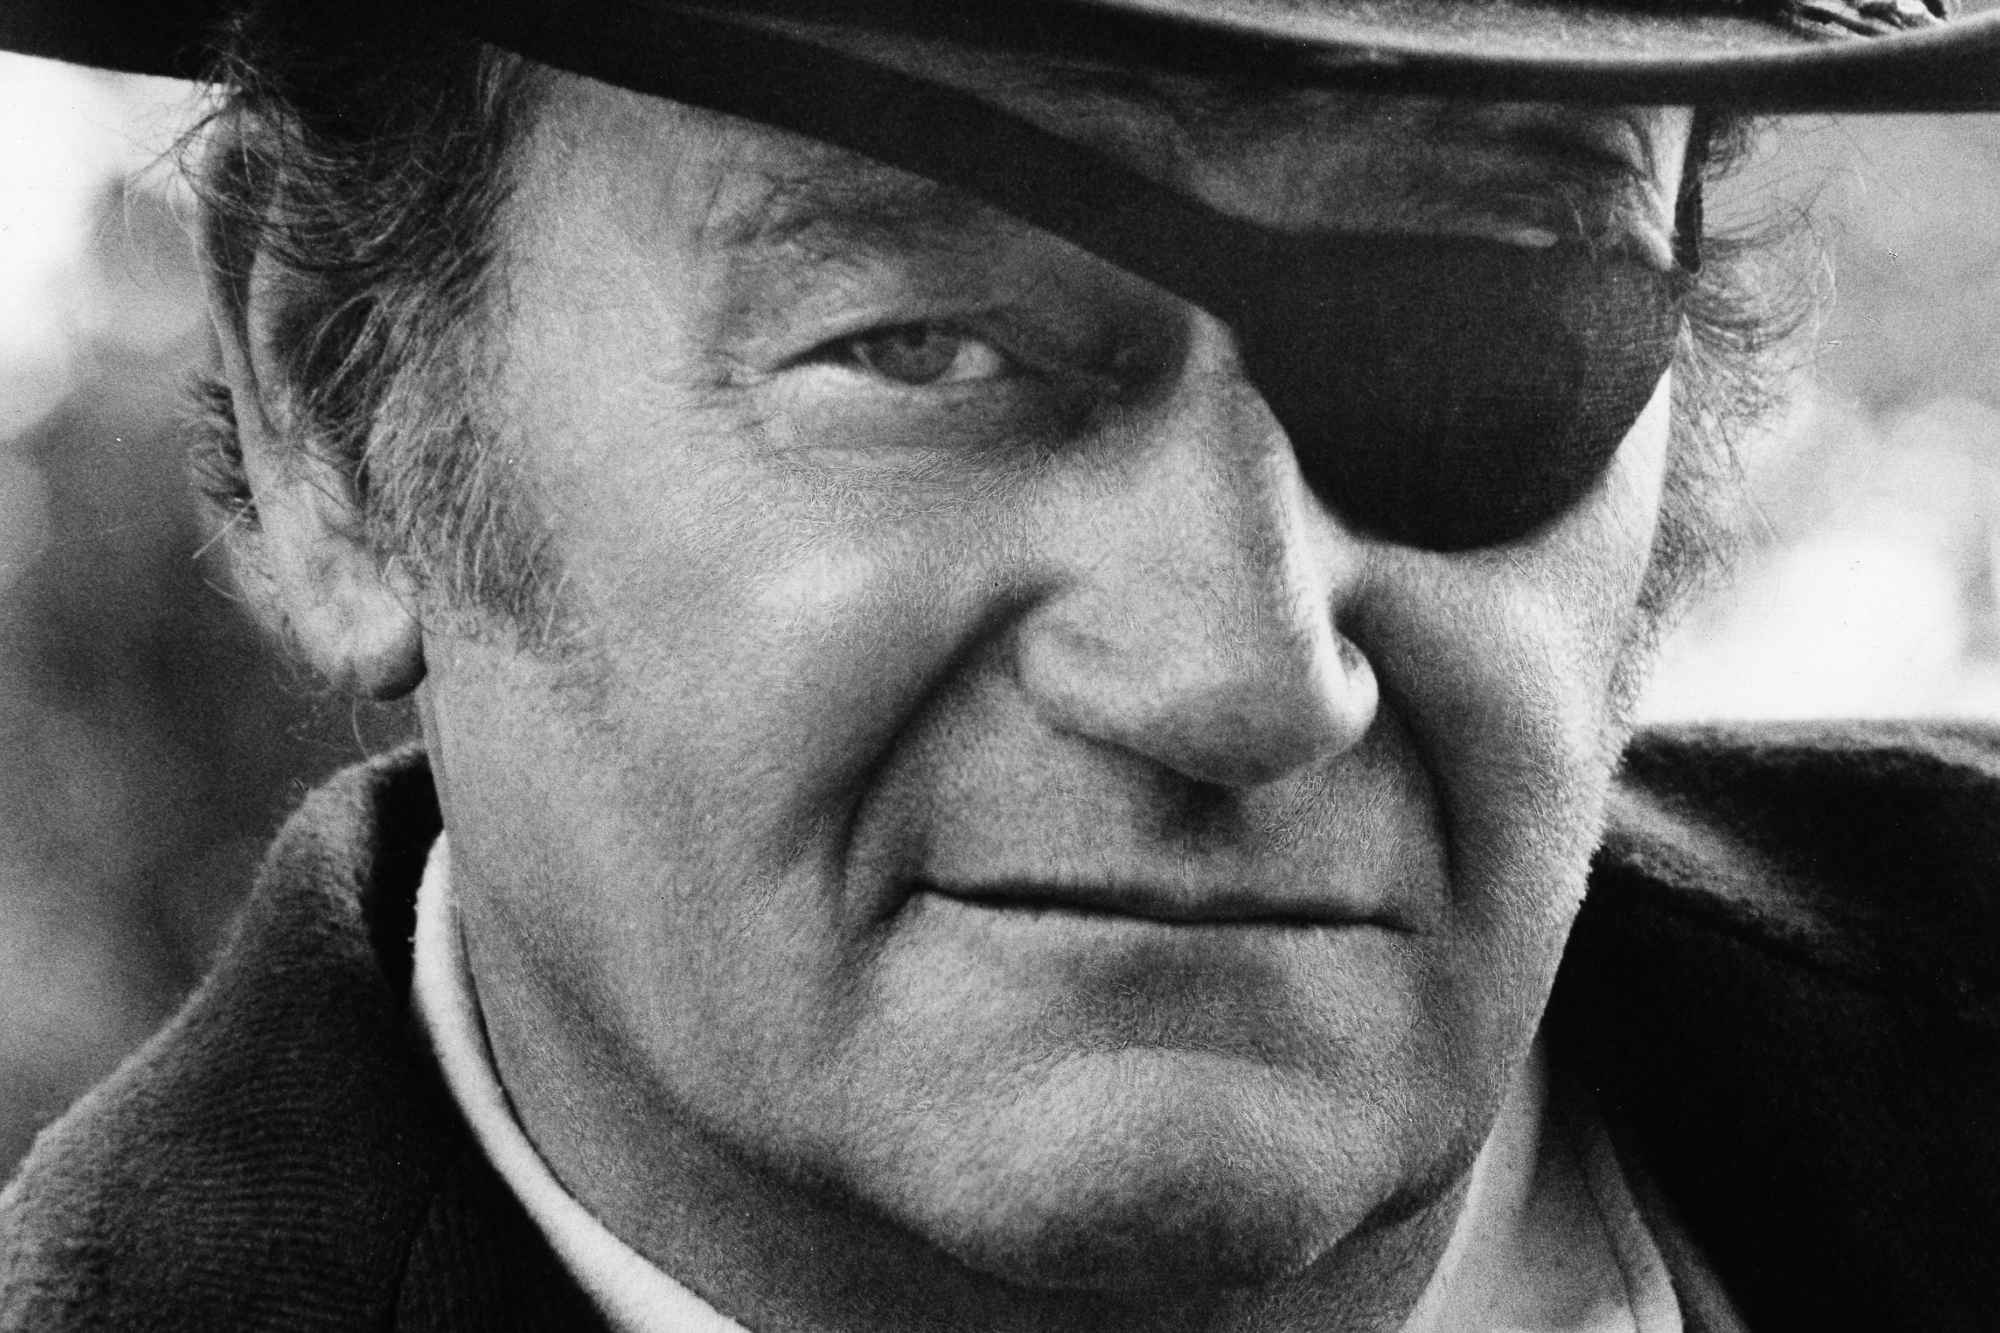 'True Grit' John Wayne as Rooster Cogburn wearing an eyepatch and cowboy hat with a slight smile on his face.